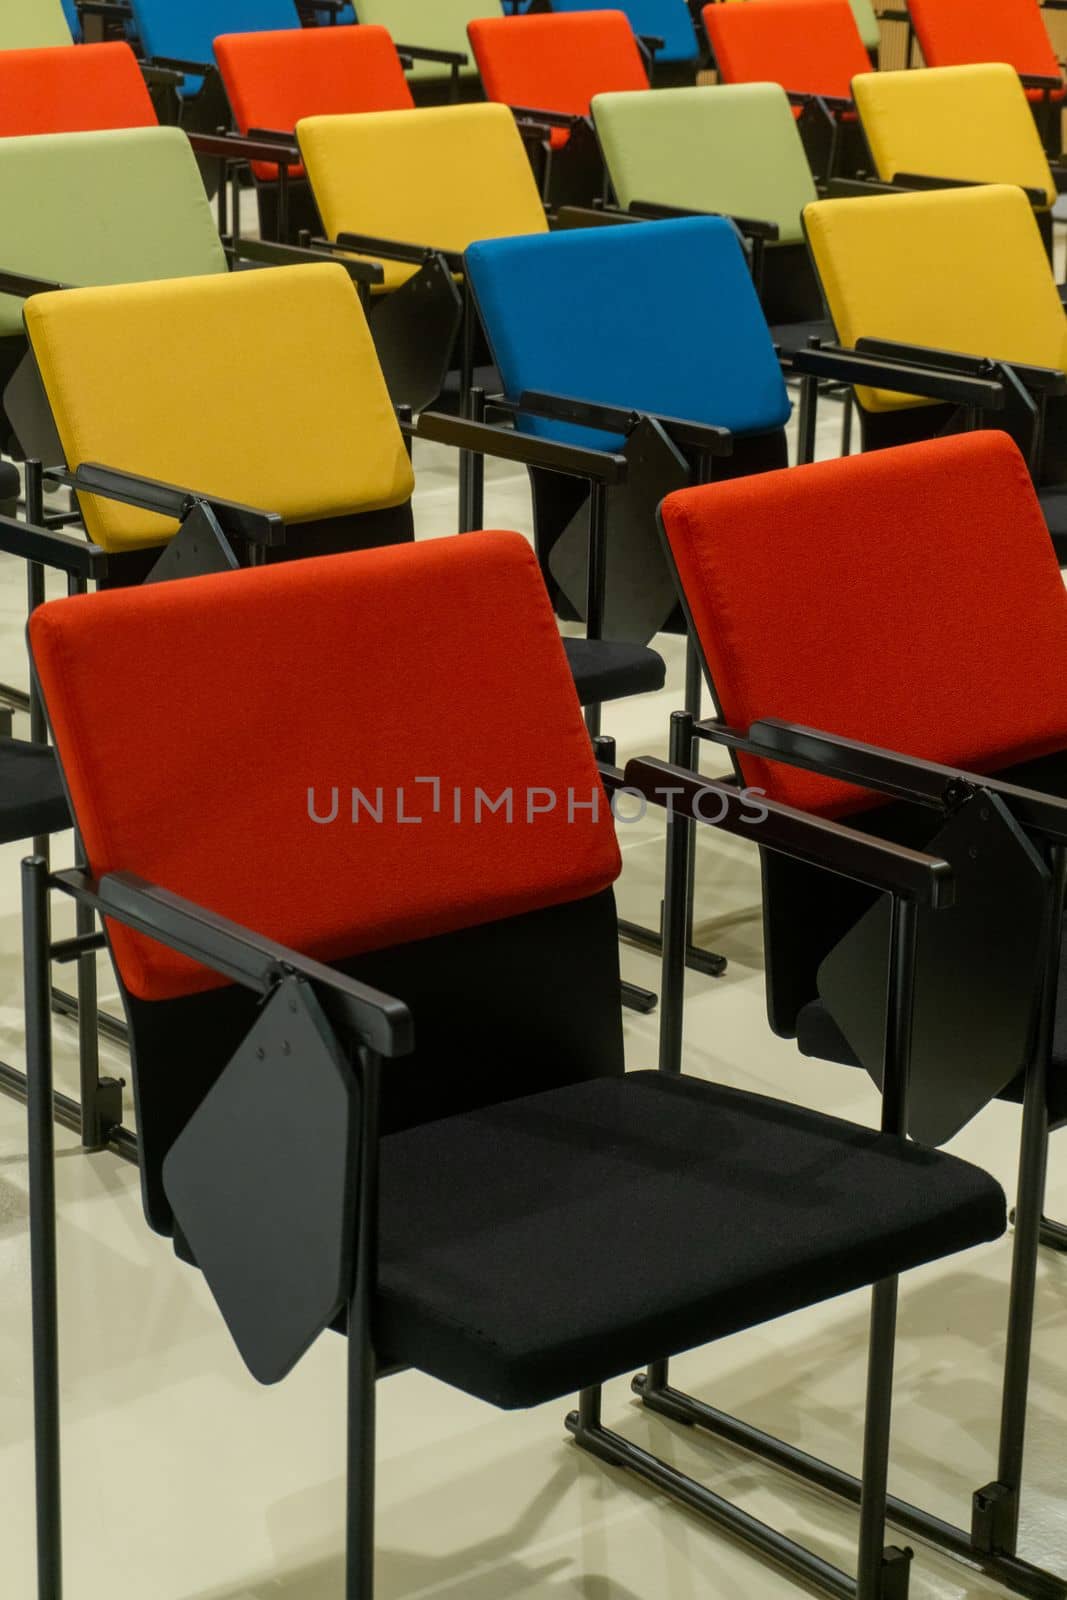 Rows of colourful seats in the hall by Challlenger